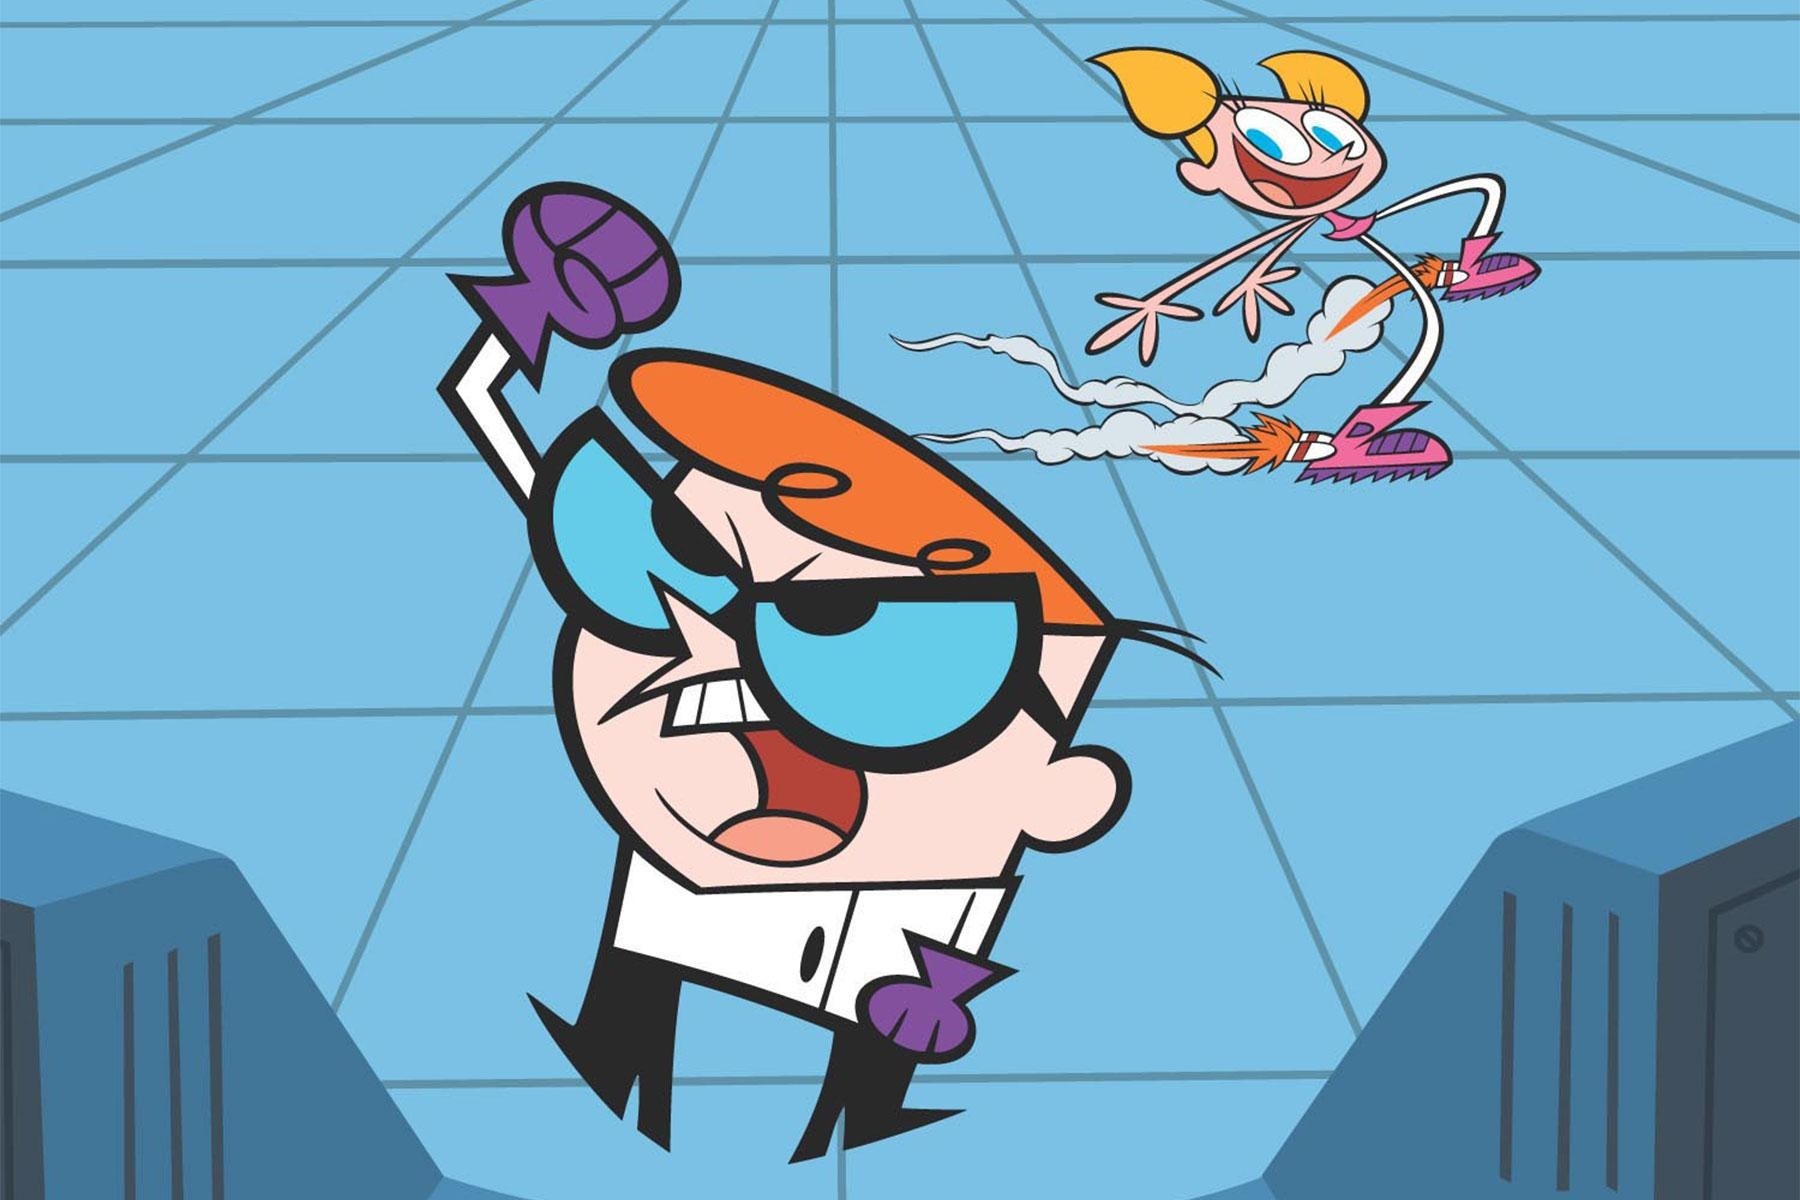 for anyone who loved Dexter's Laboratory as a kid. 